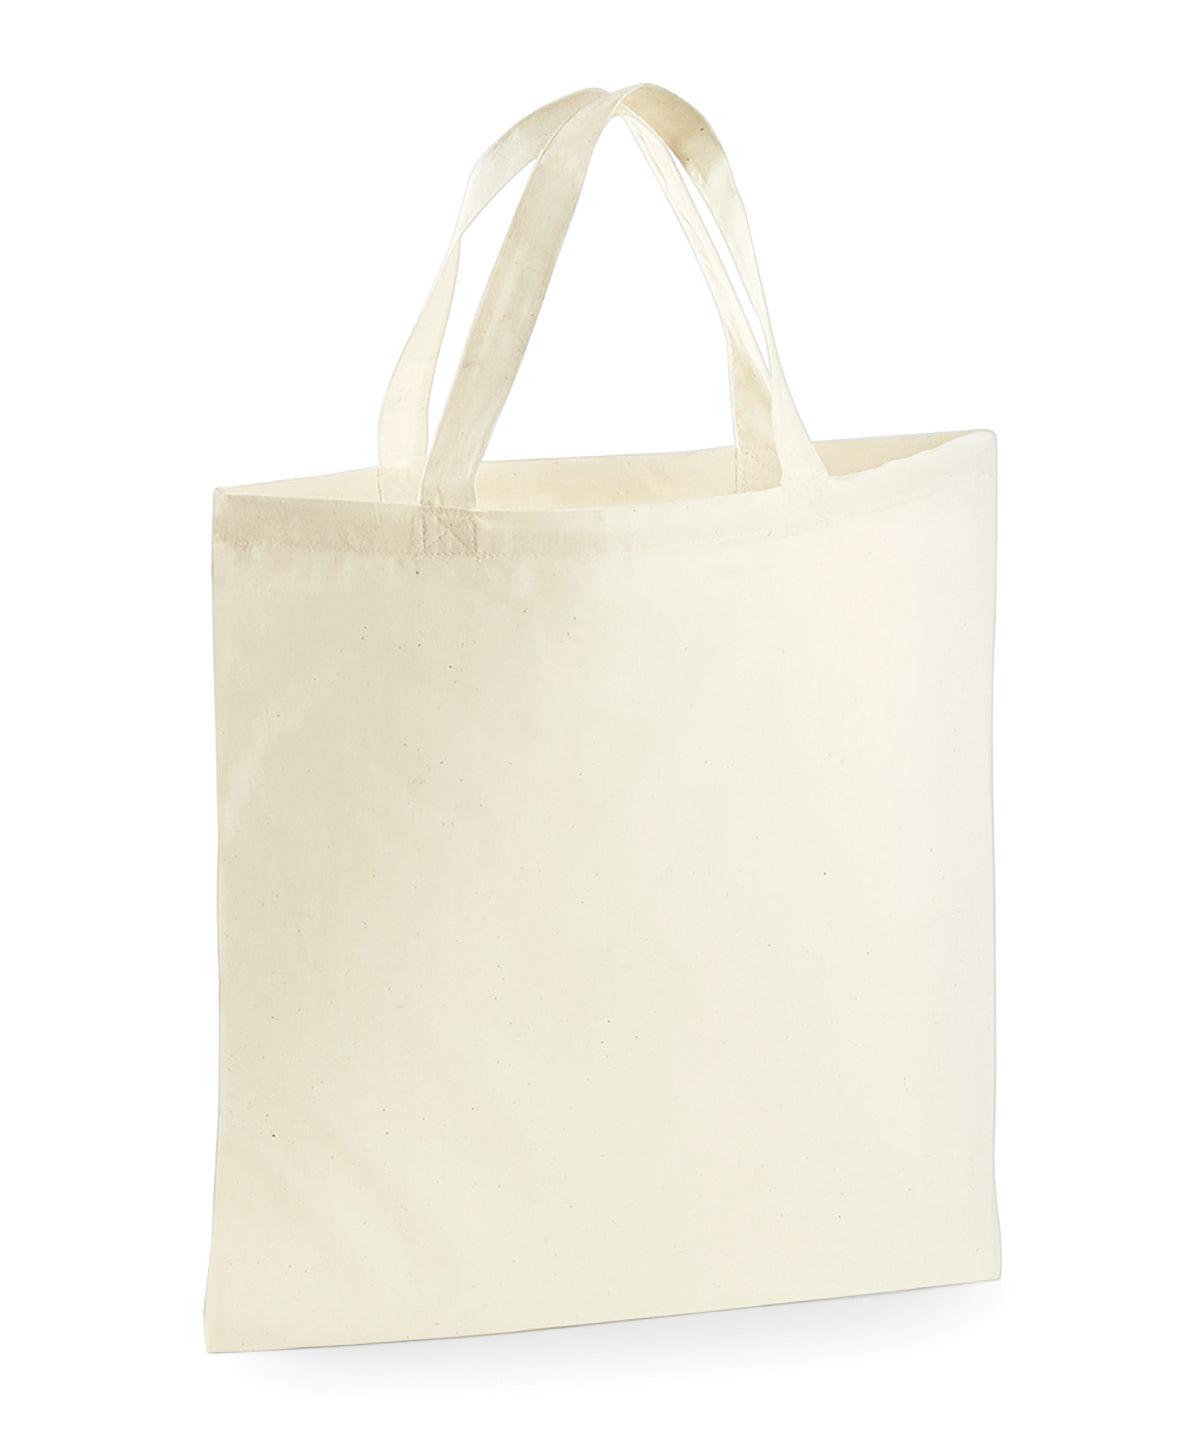 Natural - Budget promo bag for life Bags Westford Mill Bags & Luggage, Summer Accessories Schoolwear Centres